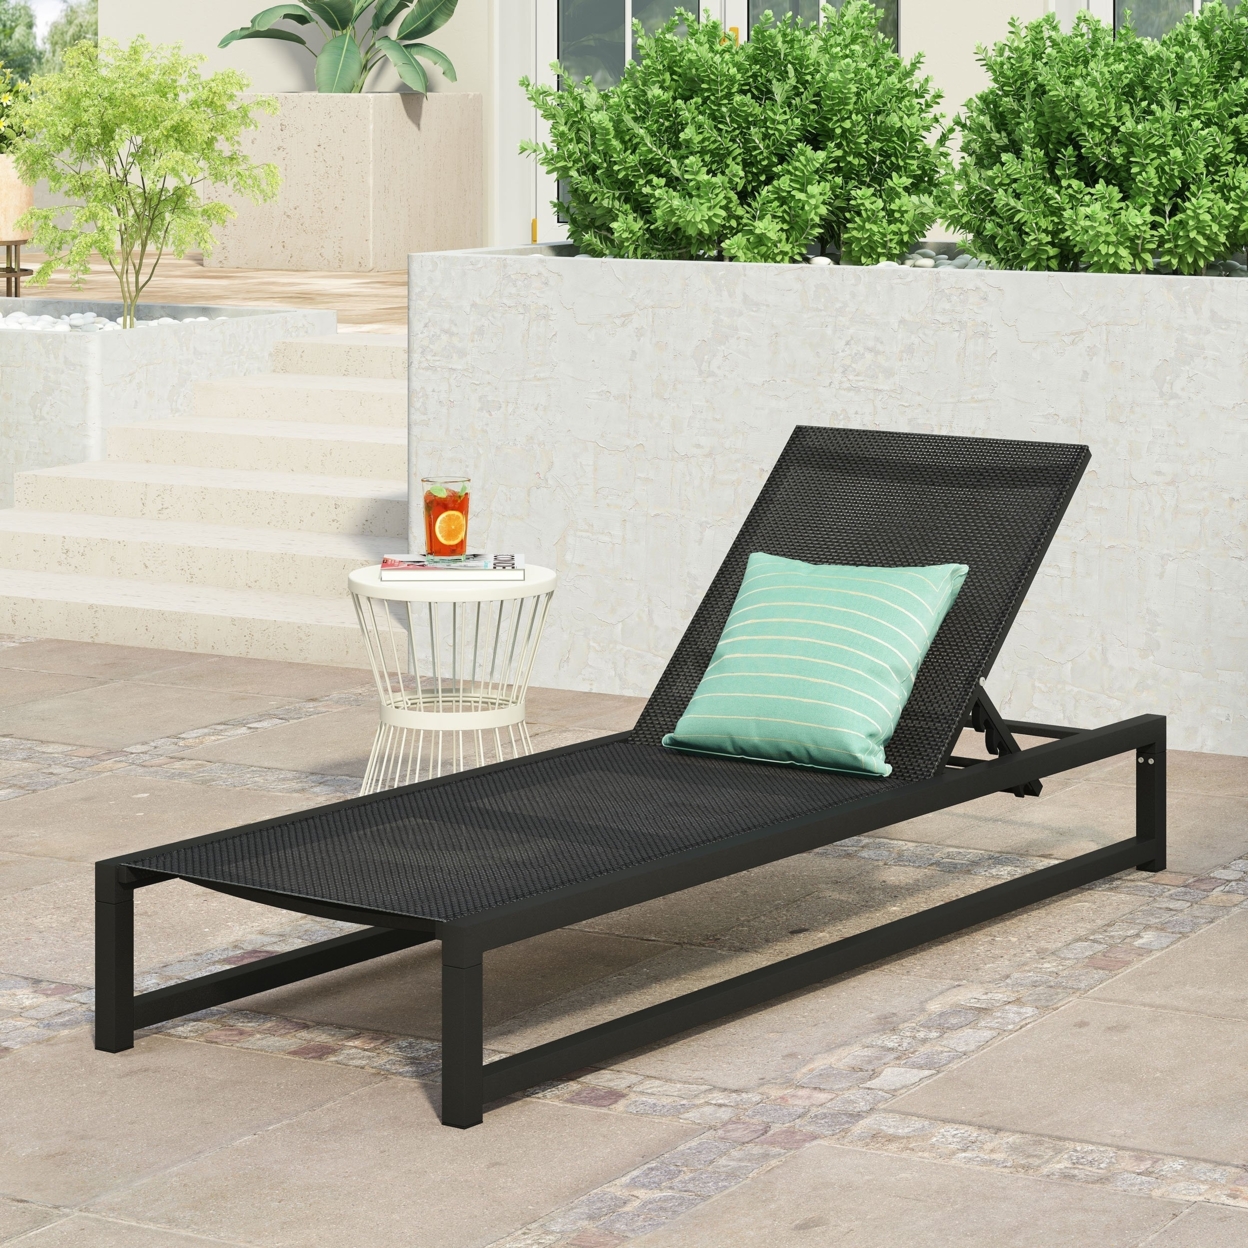 Moderna Outdoor Aluminum Chaise Lounge With Mesh Seating - Black